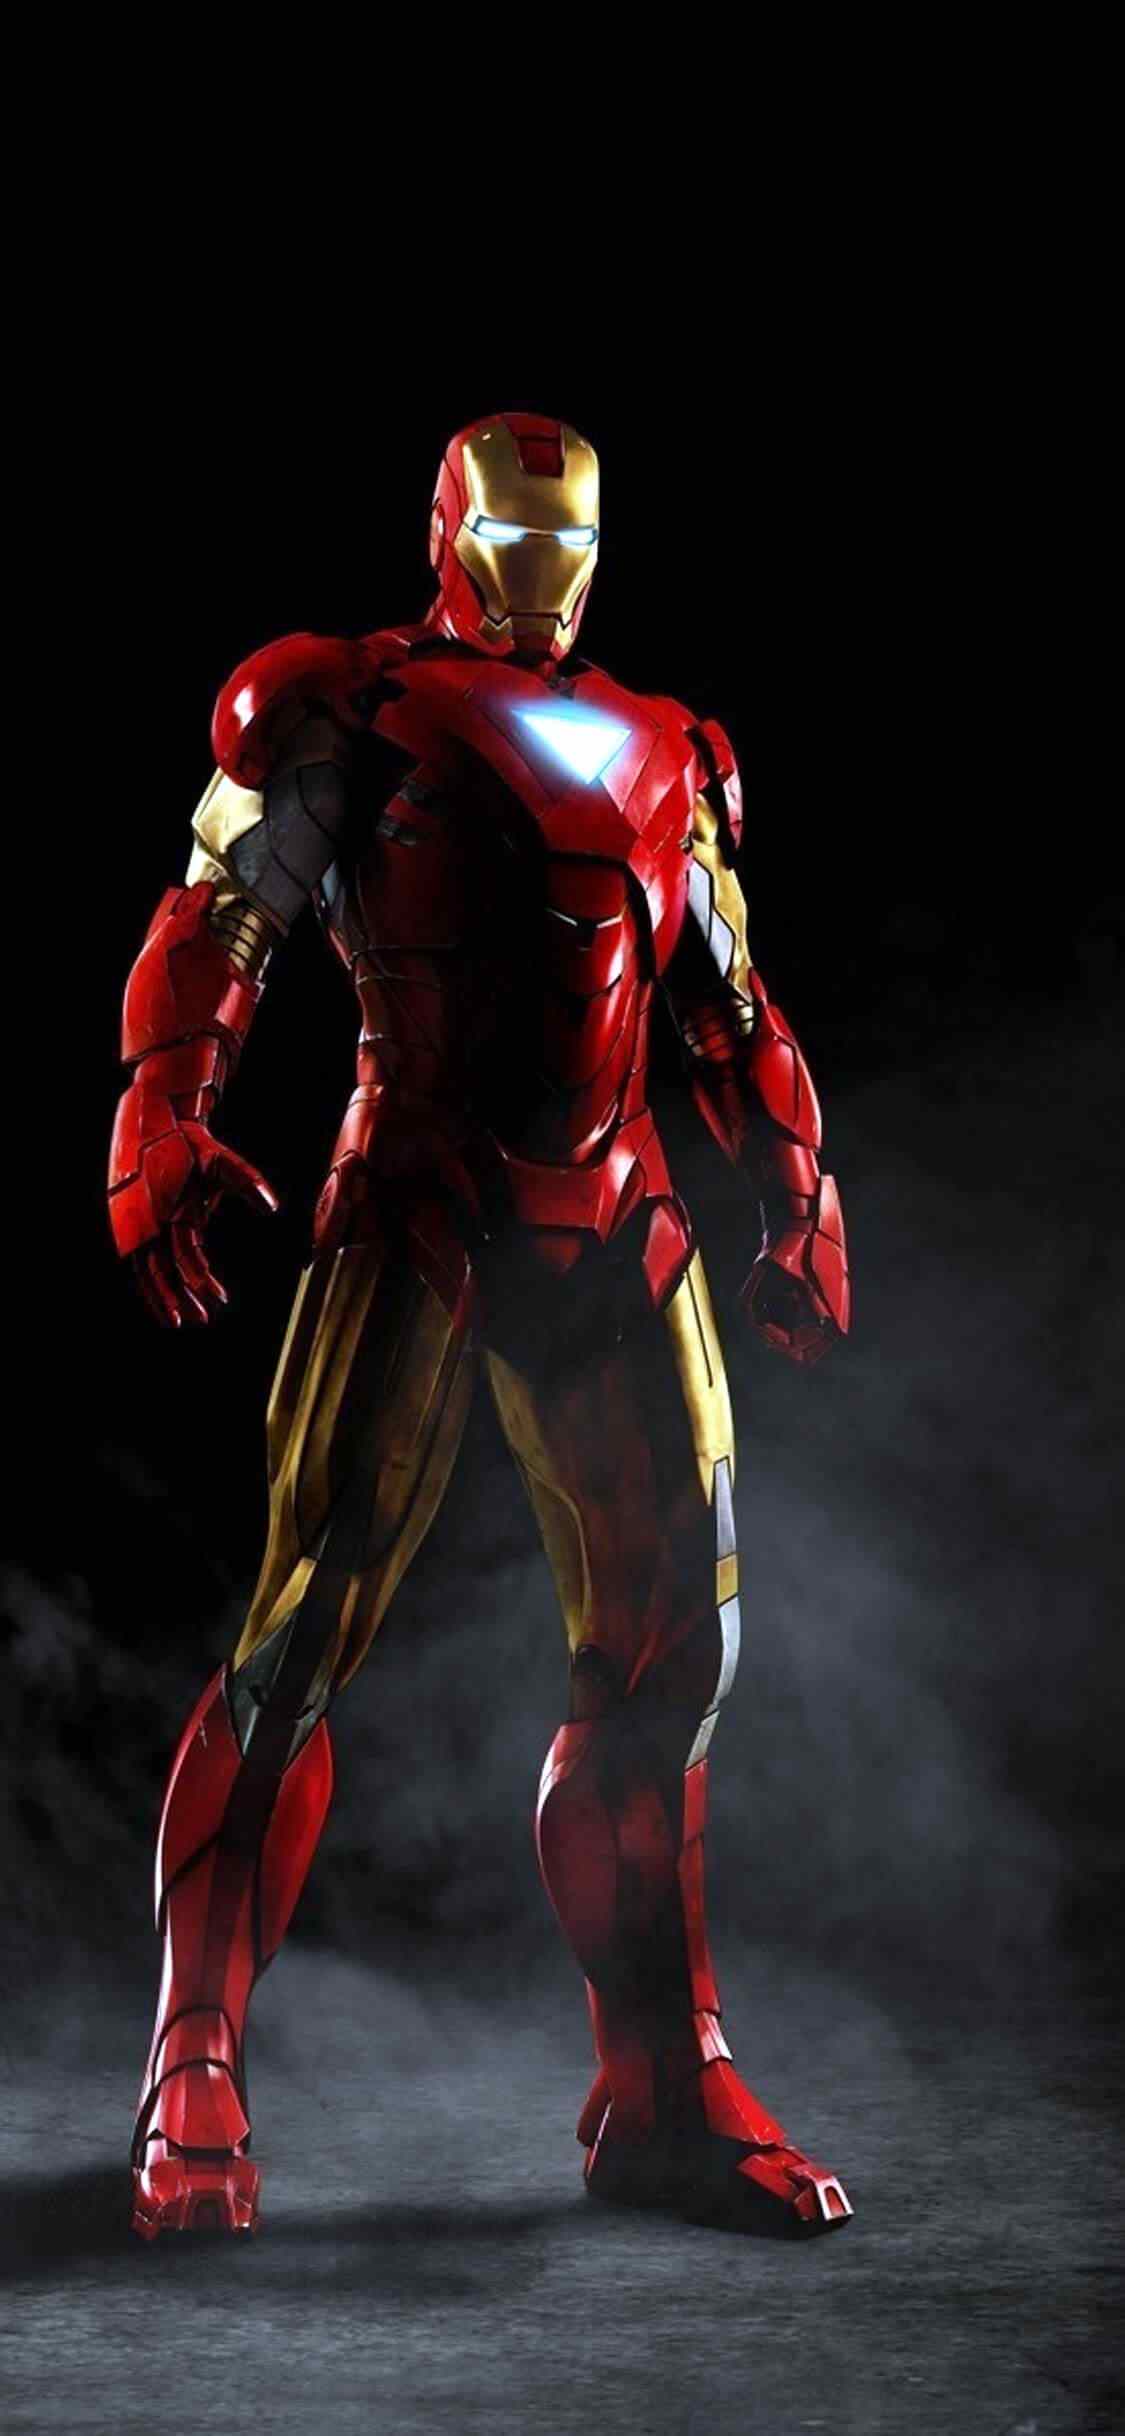 Black Iron Man Hd Wallpapers For Mobile